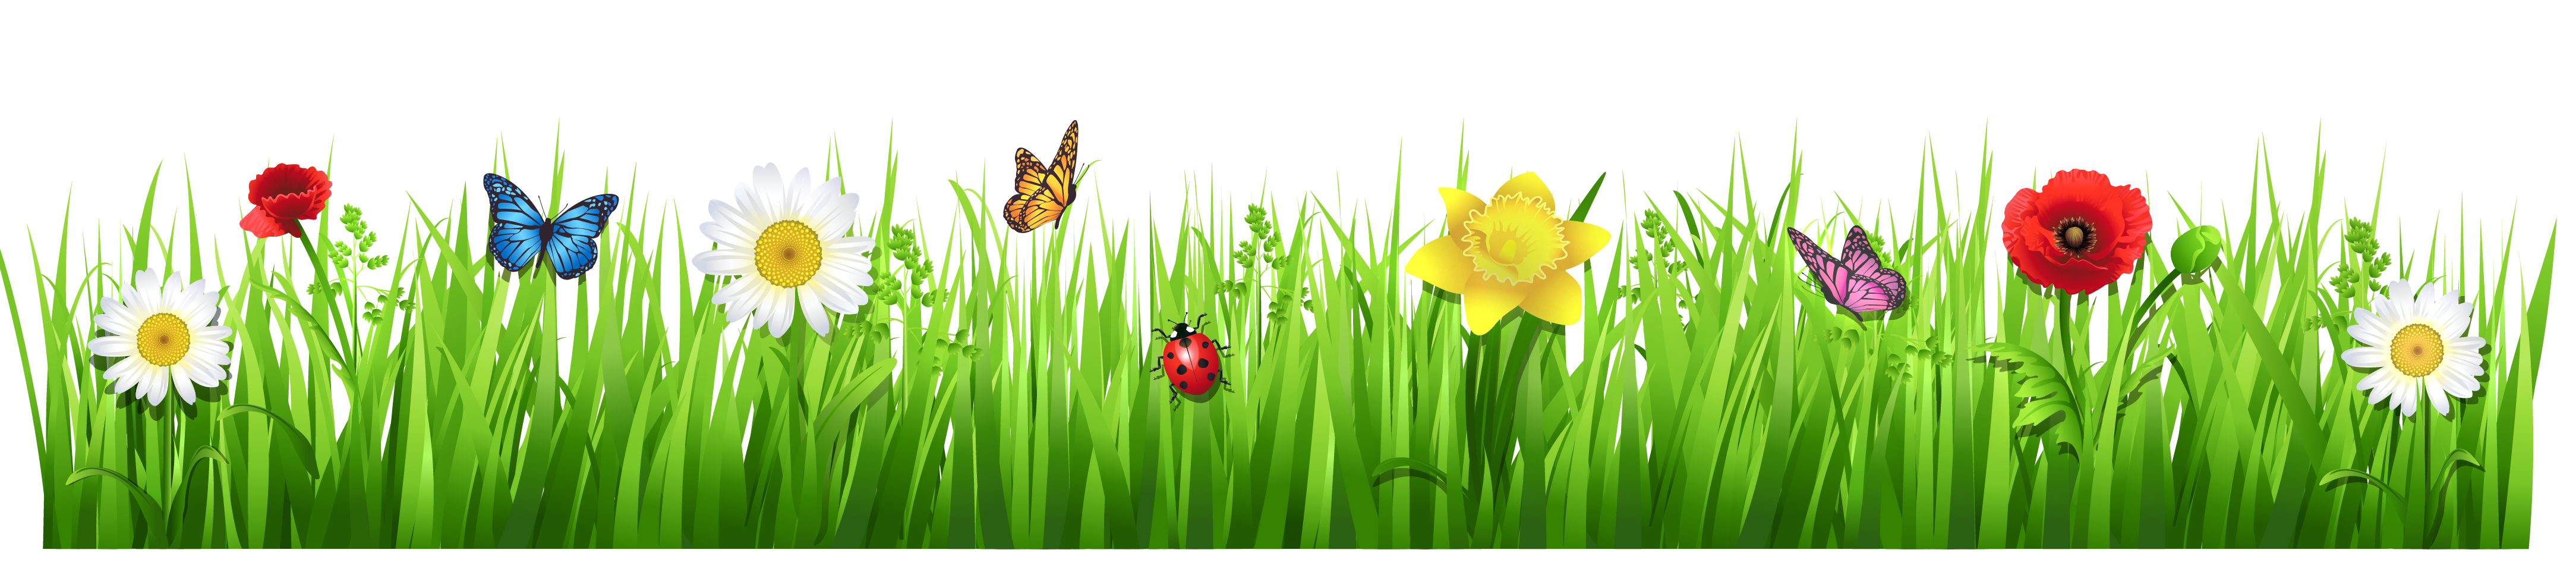 clipart of spring flowers - photo #39